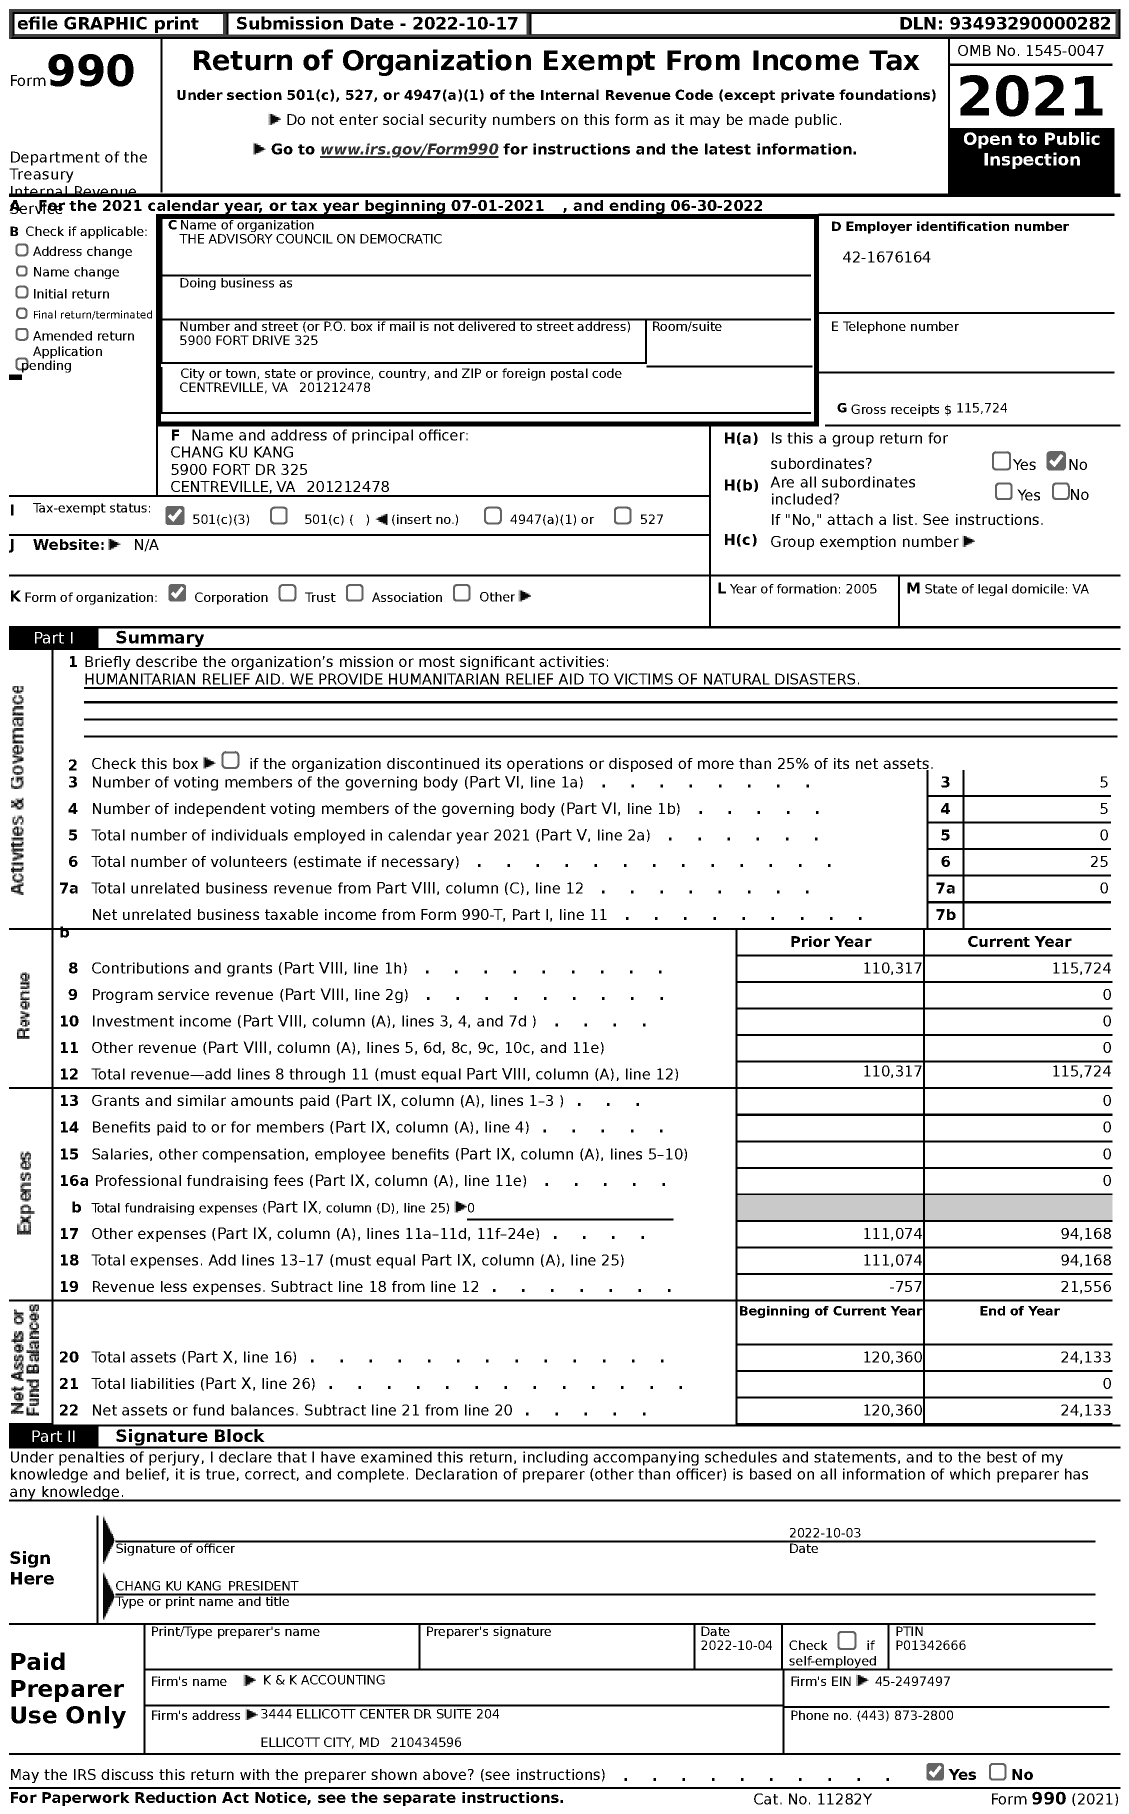 Image of first page of 2021 Form 990 for The Advisory Council on Democratic